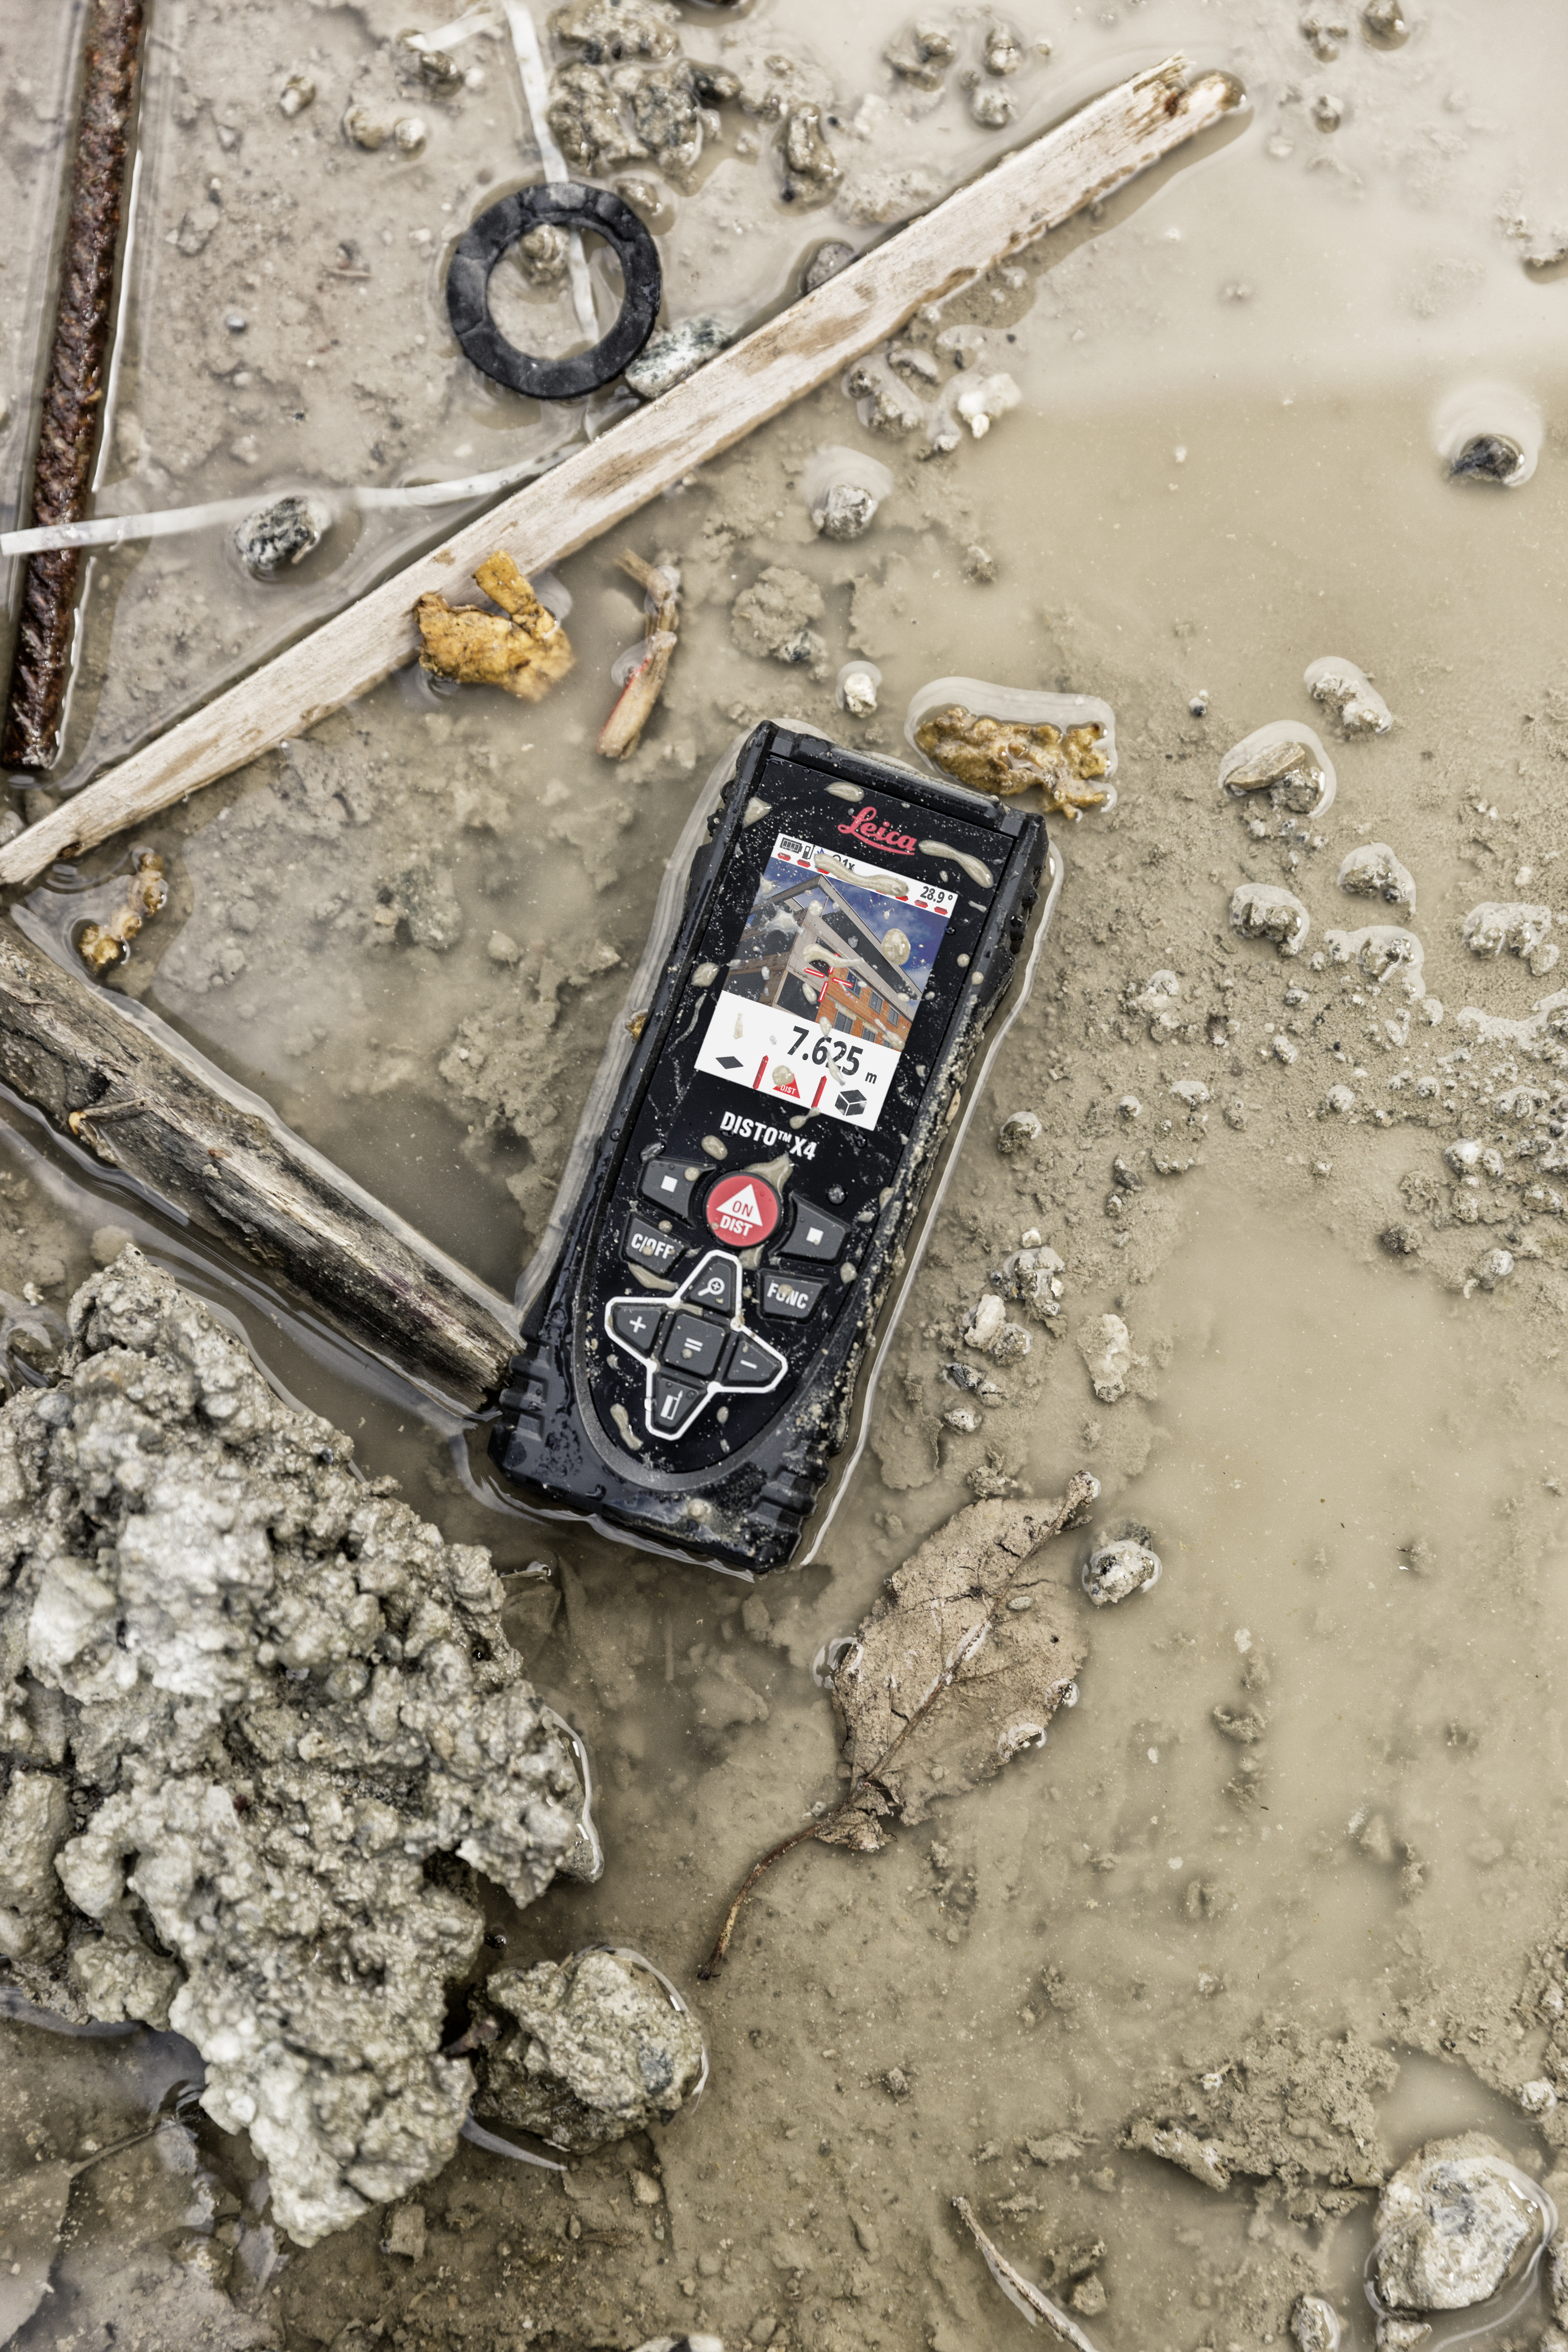 The Leica DISTO X4 with IP65 protection (dust and jet water protection)